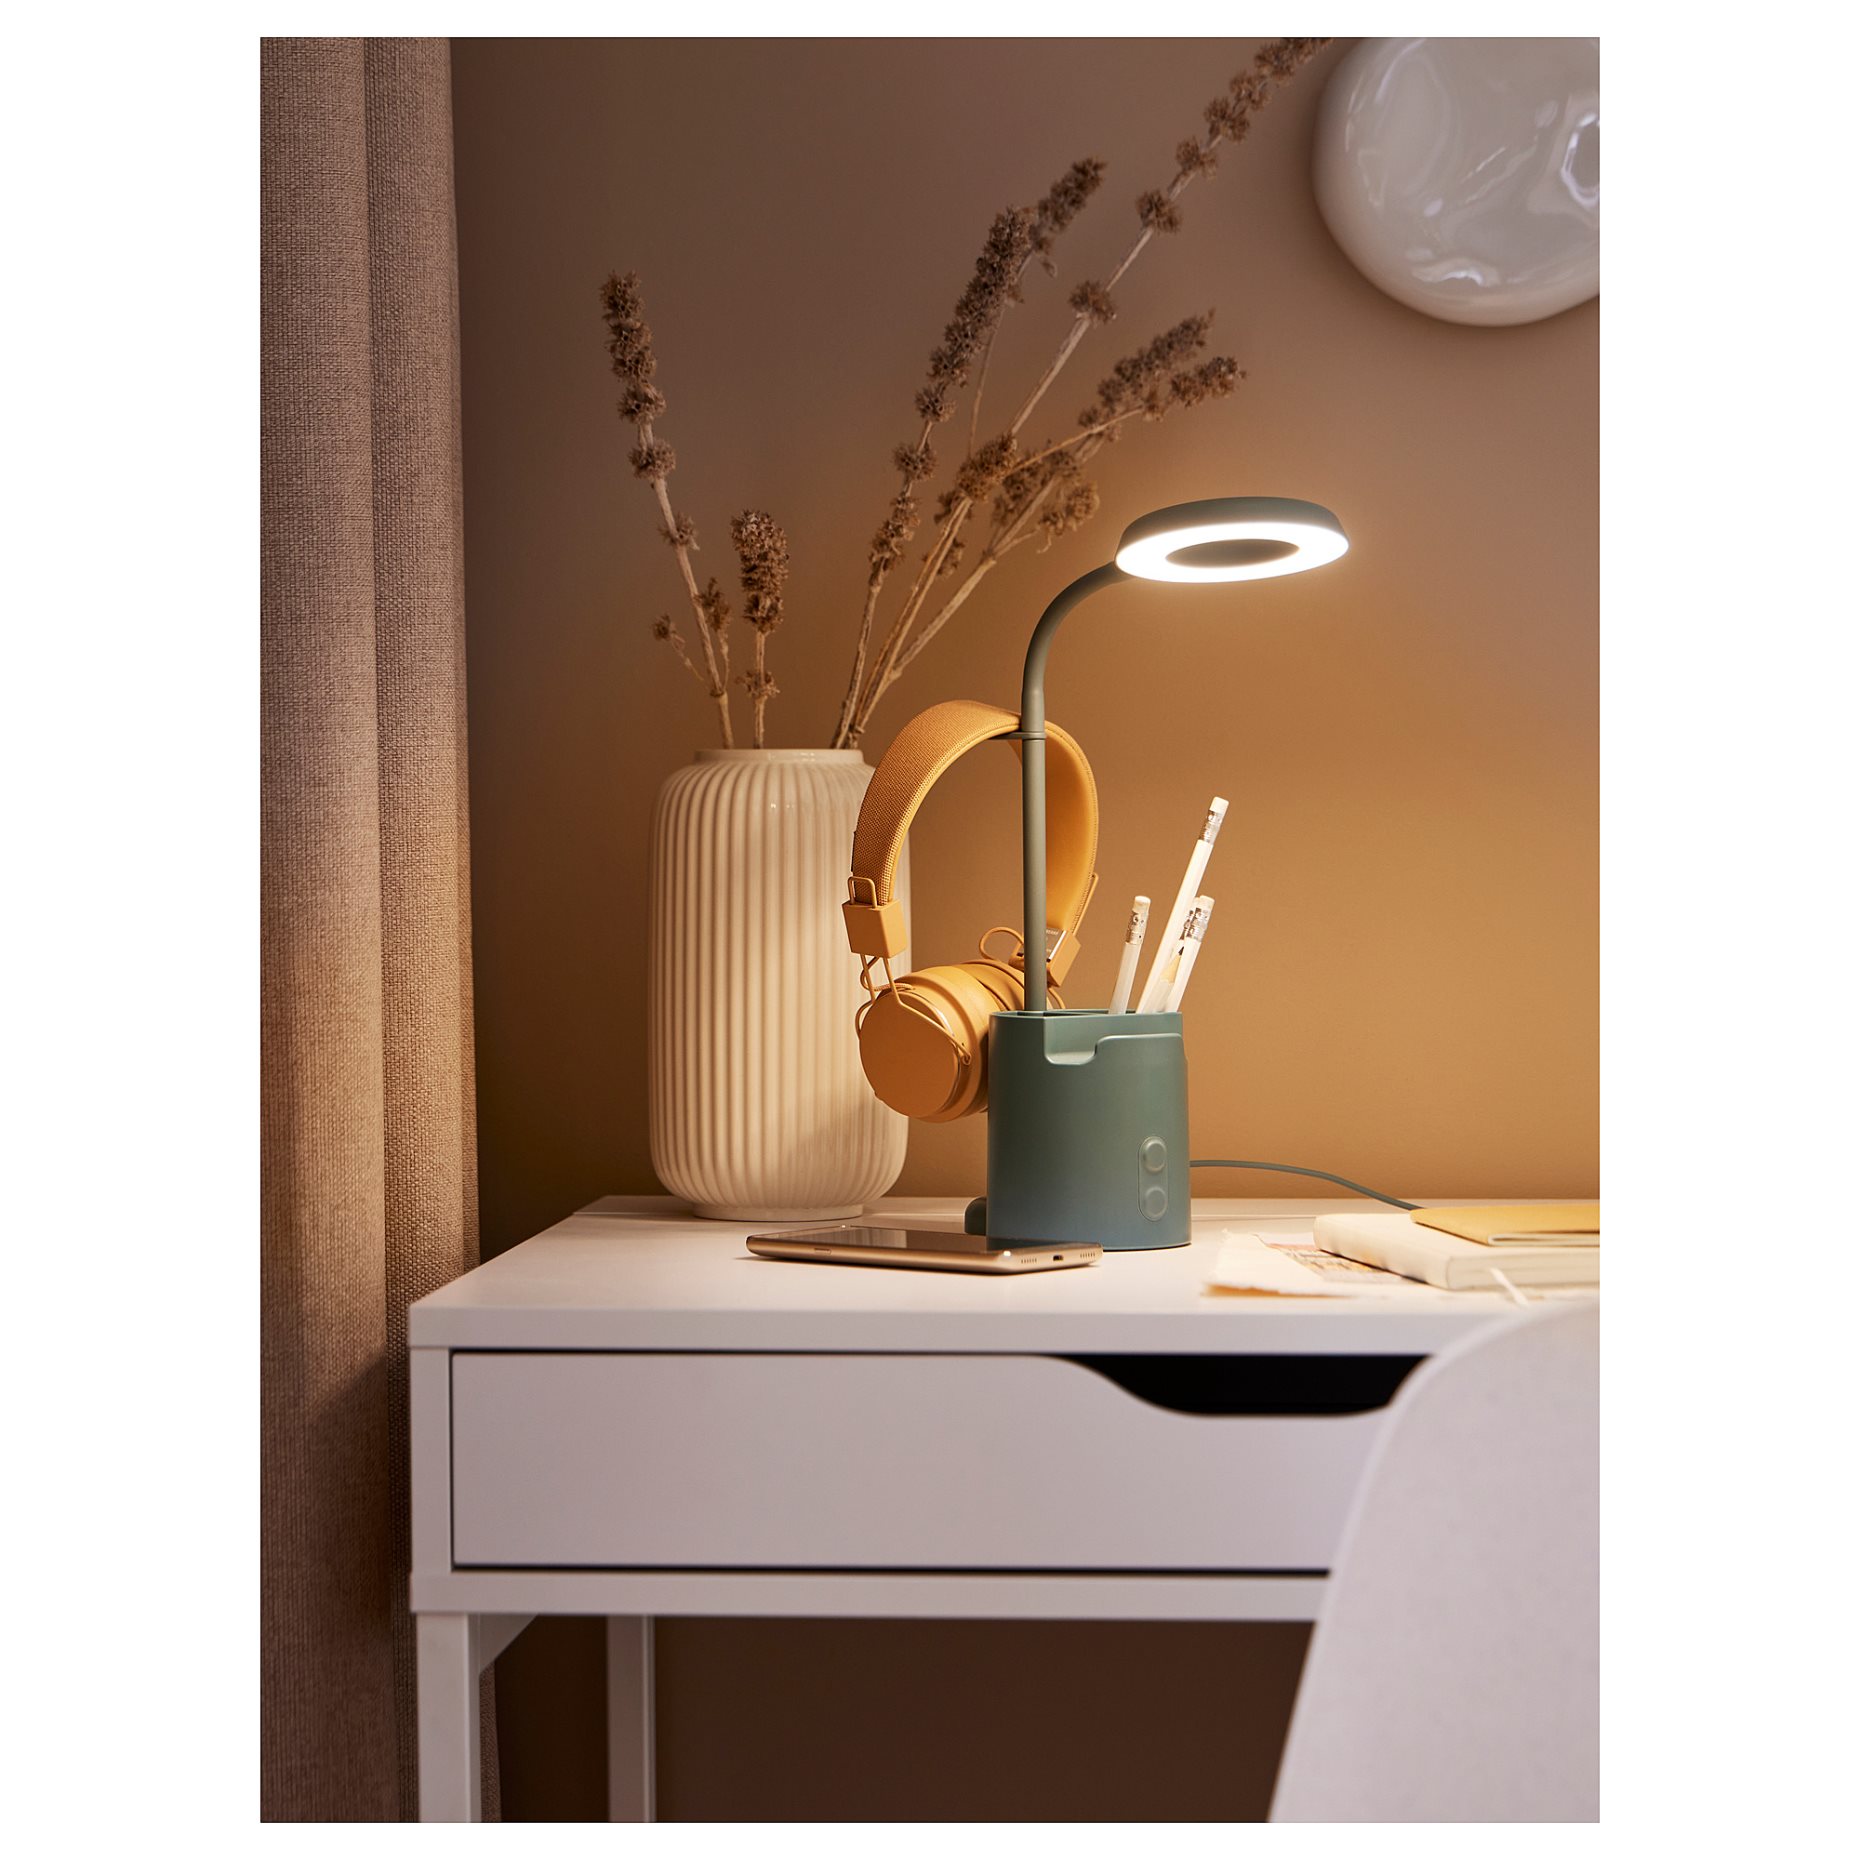 BRUNBÅGE, work lamp with storage/dimmable/built-in LED light source, 005.421.68